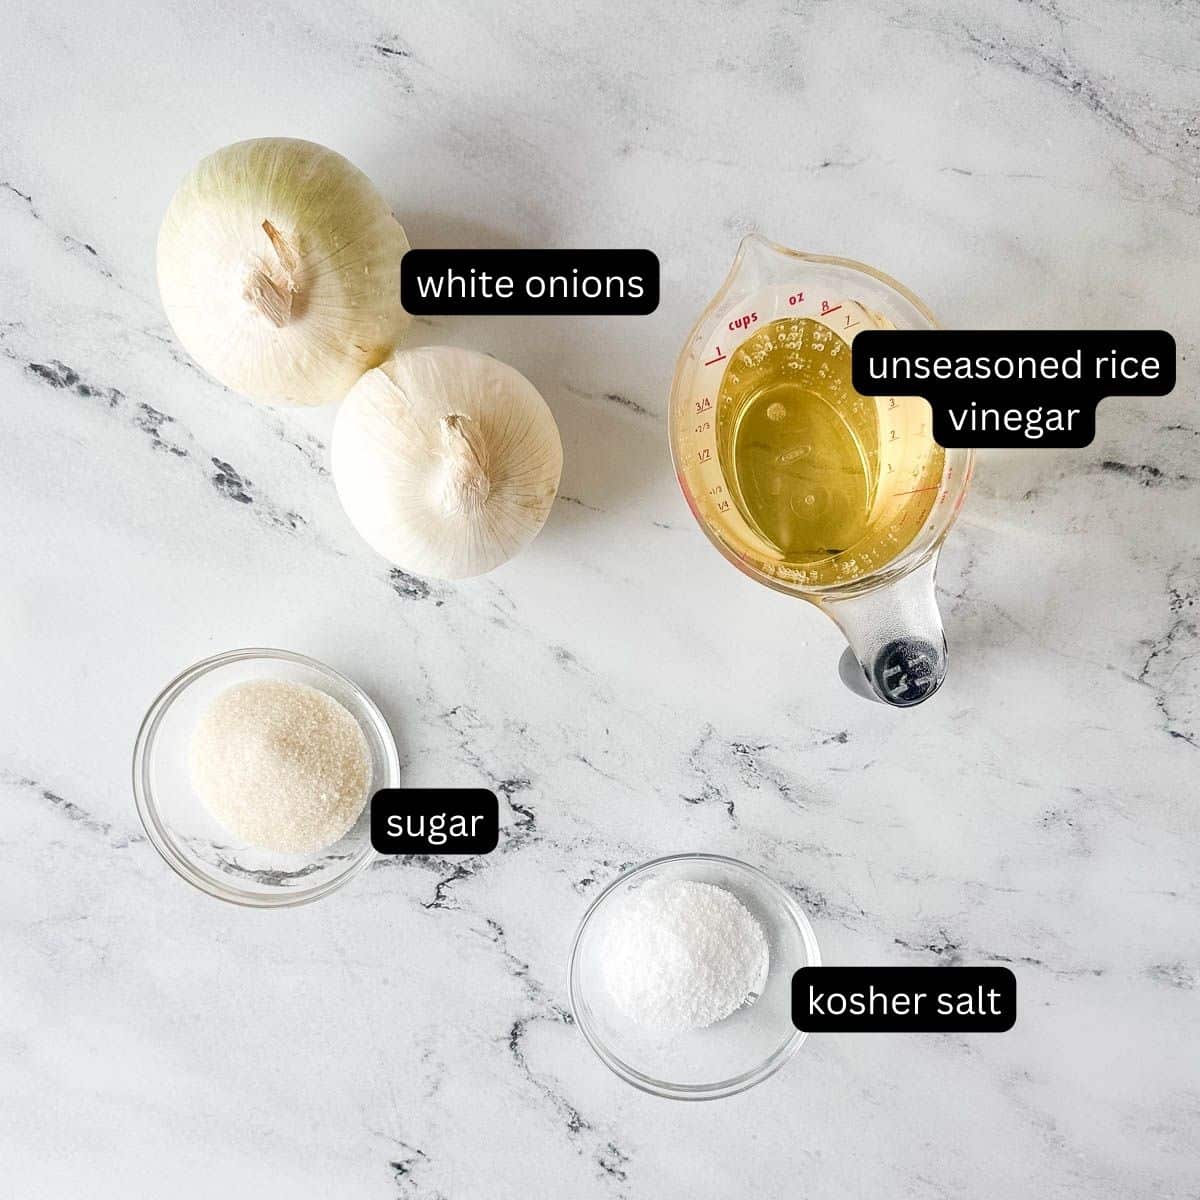 Labeled ingredients for pickled white onions on a white marble counter.